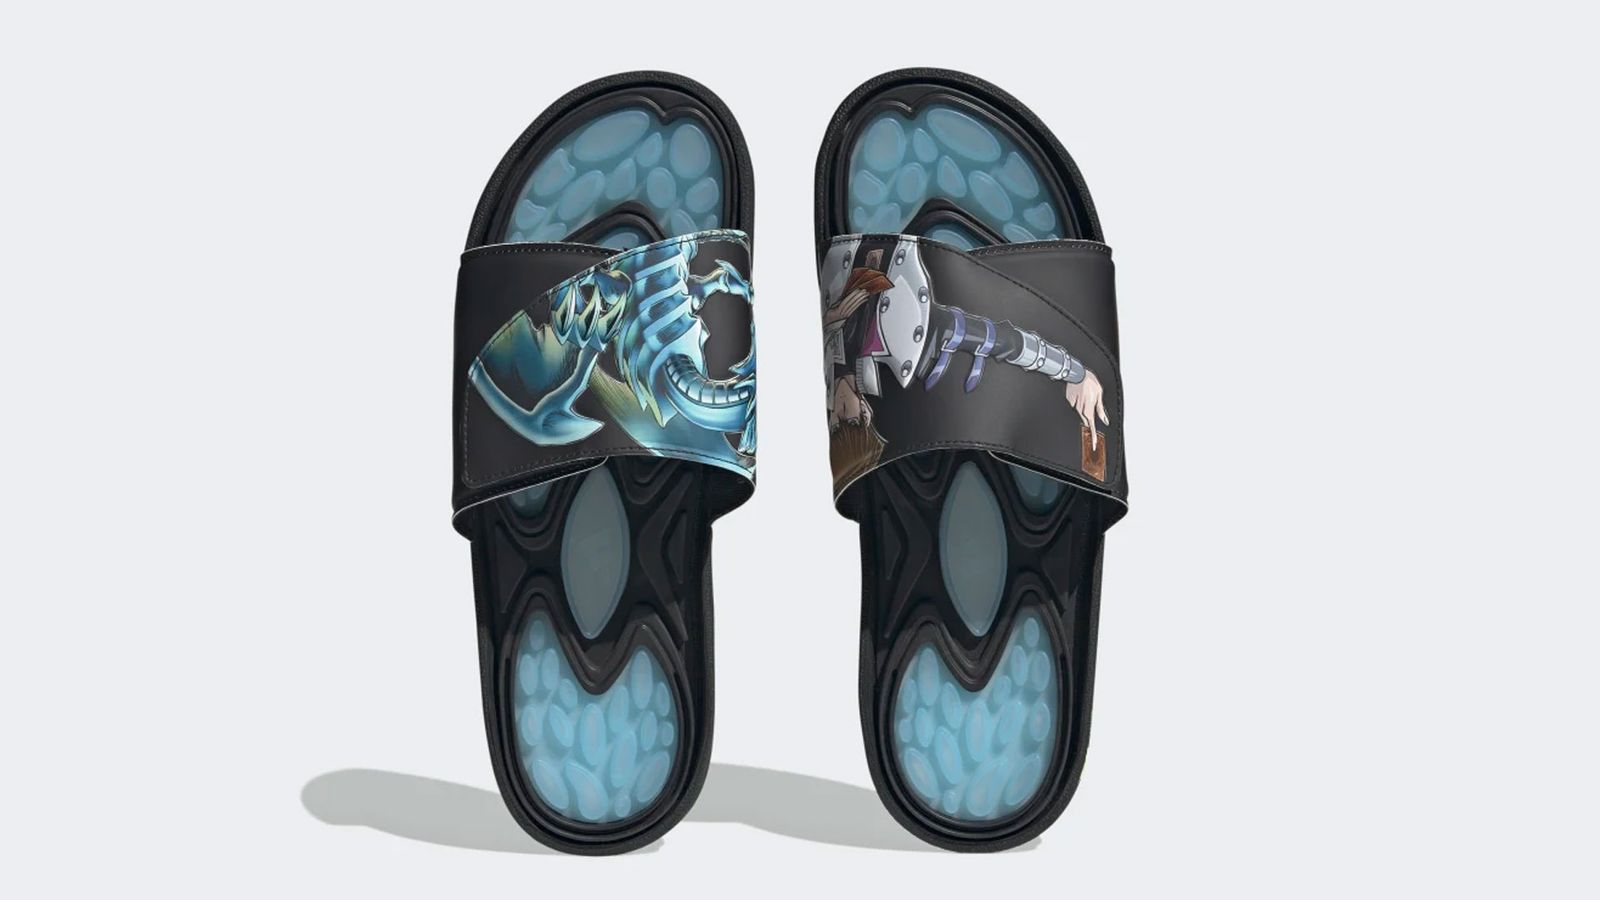 Yu-Gi-Oh! x adidas Reptossage Slides product image of black and light blue sliders with graphics of Seto and Blue Eyes White Dragon on top.